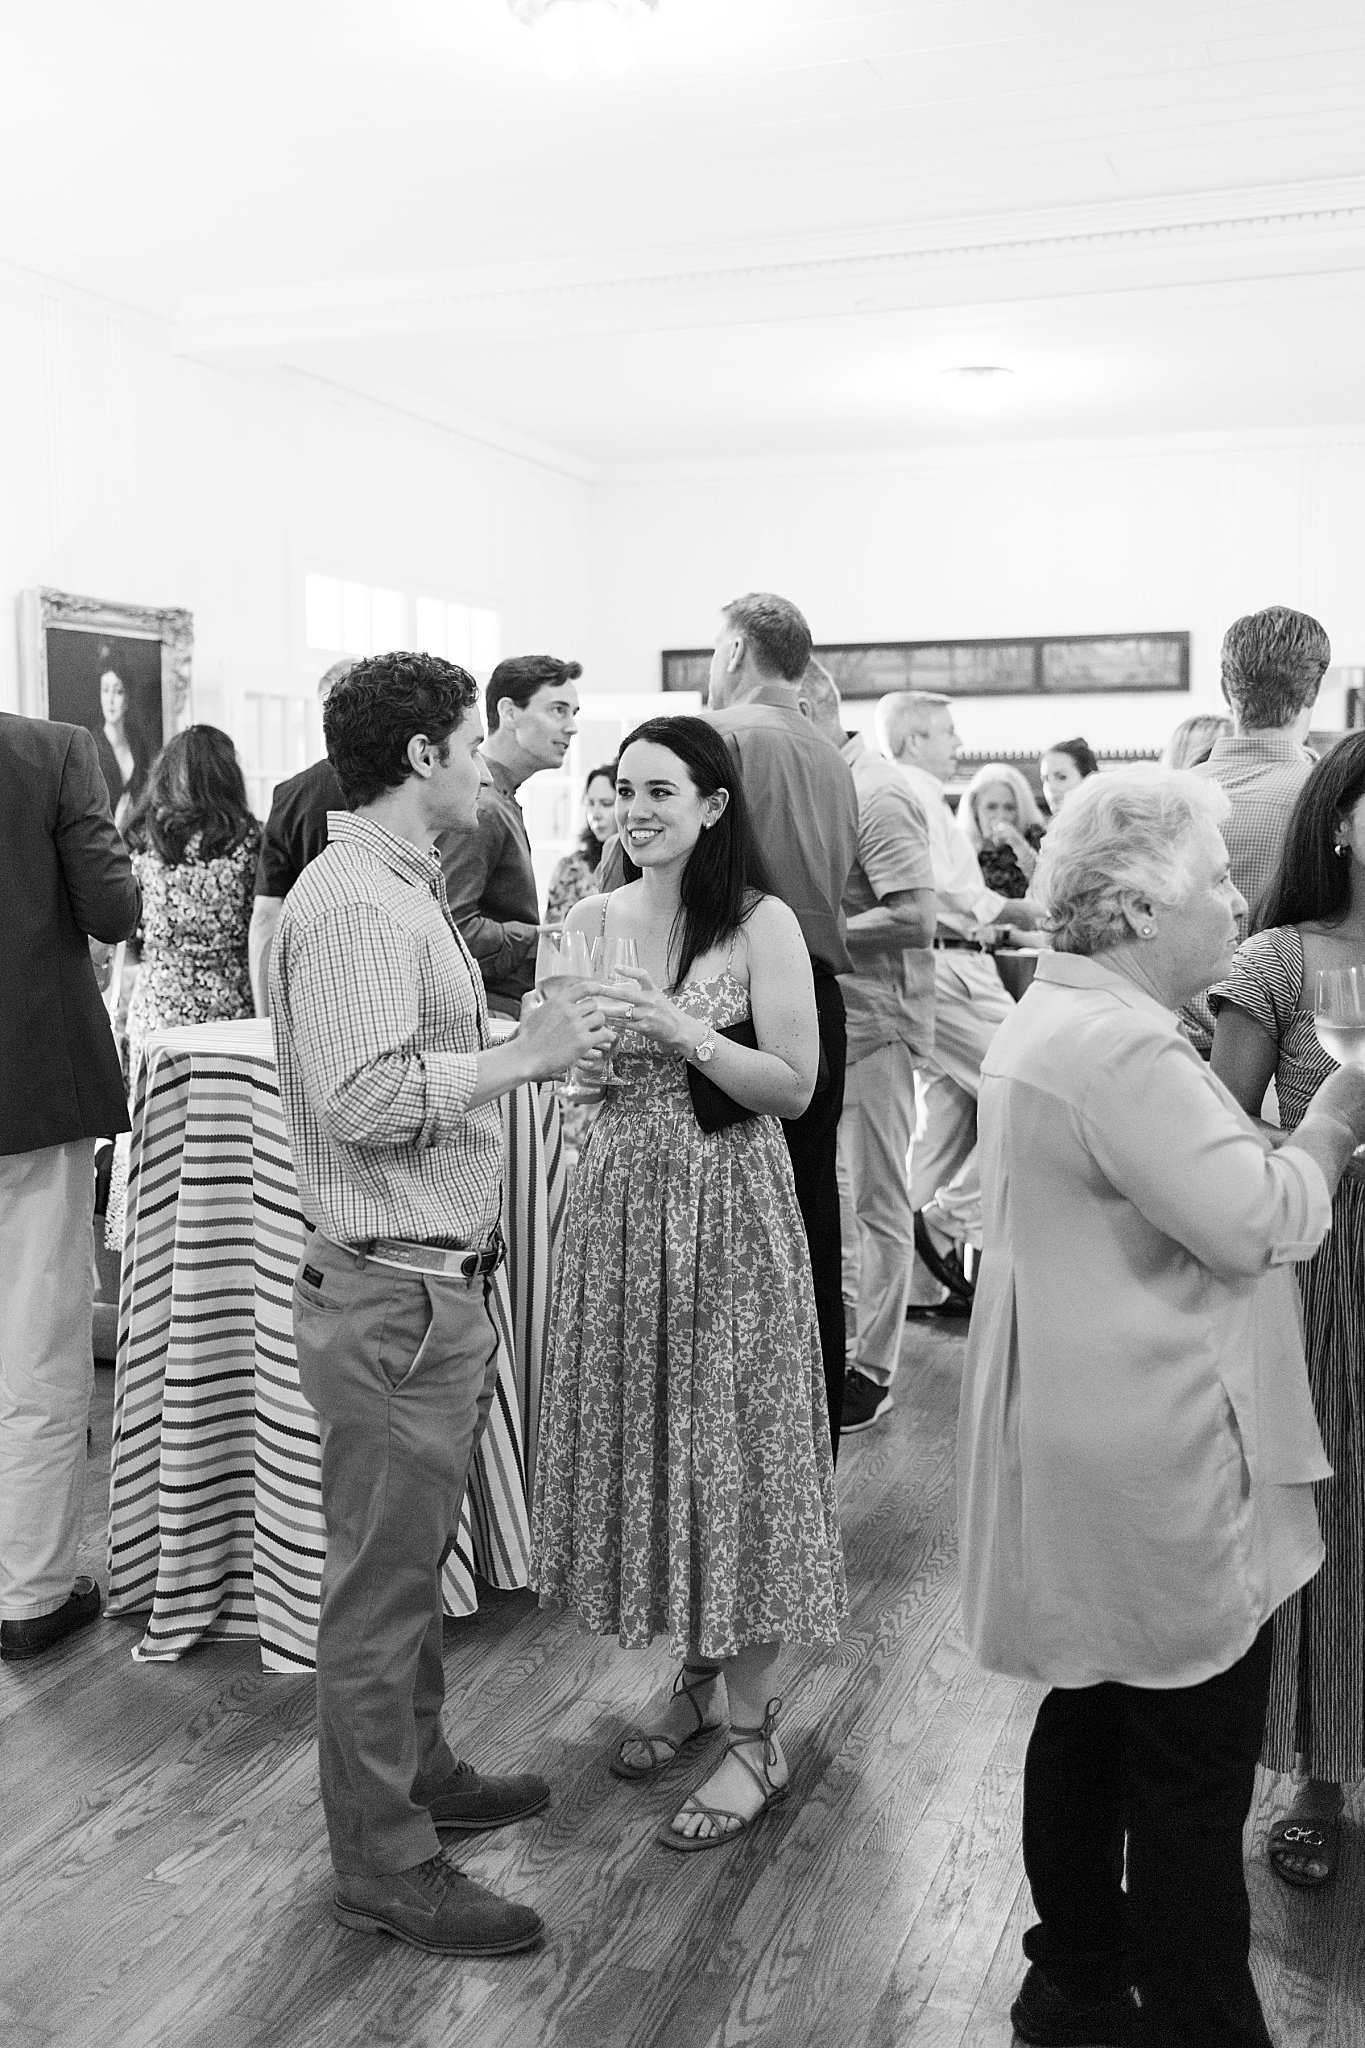 guests mingle during rehearsal dinner by Cape Cod wedding photographer